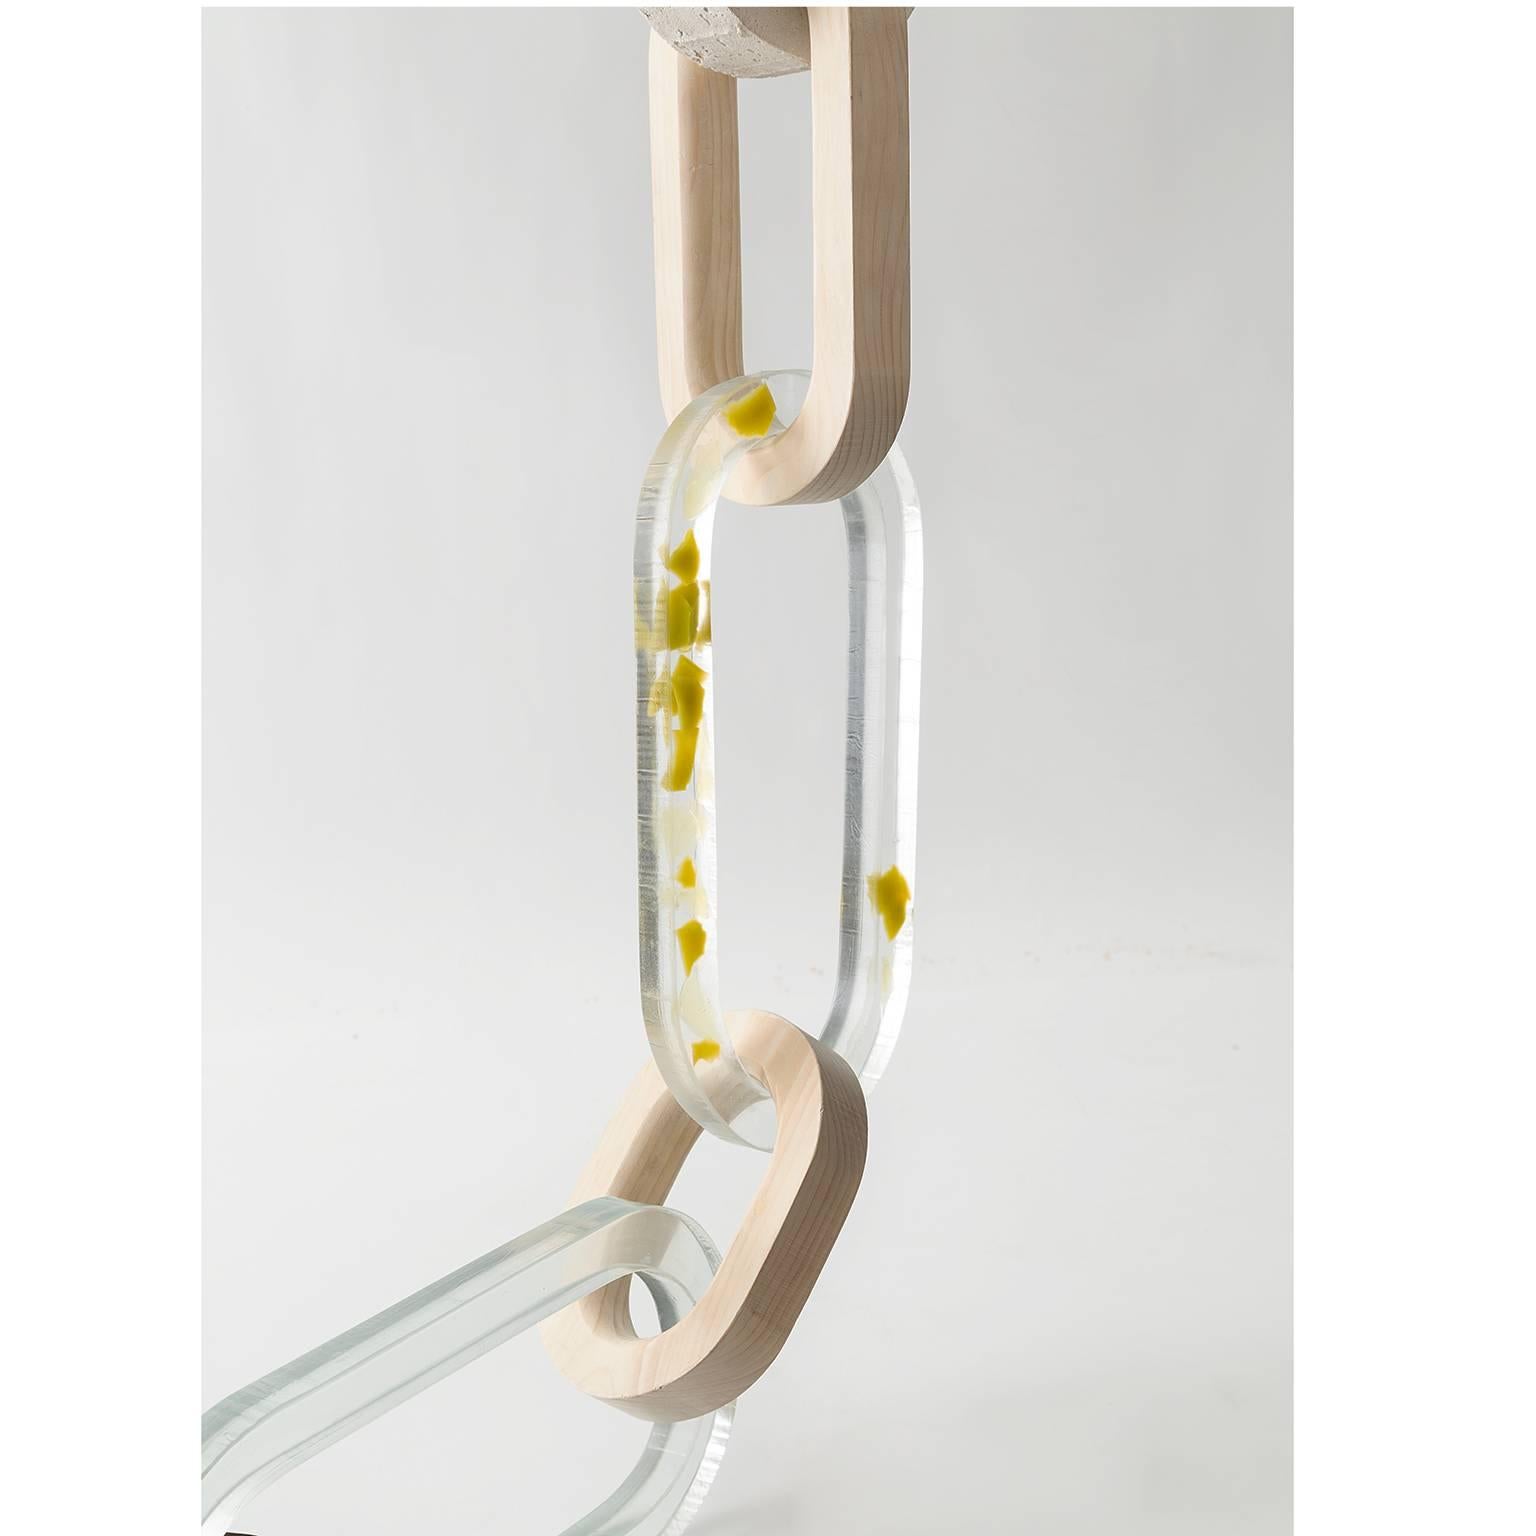 Organic Modern Twelve Foot Long Hanging Chain Sculpture in Concrete, Resin and Wood - IN STOCK For Sale